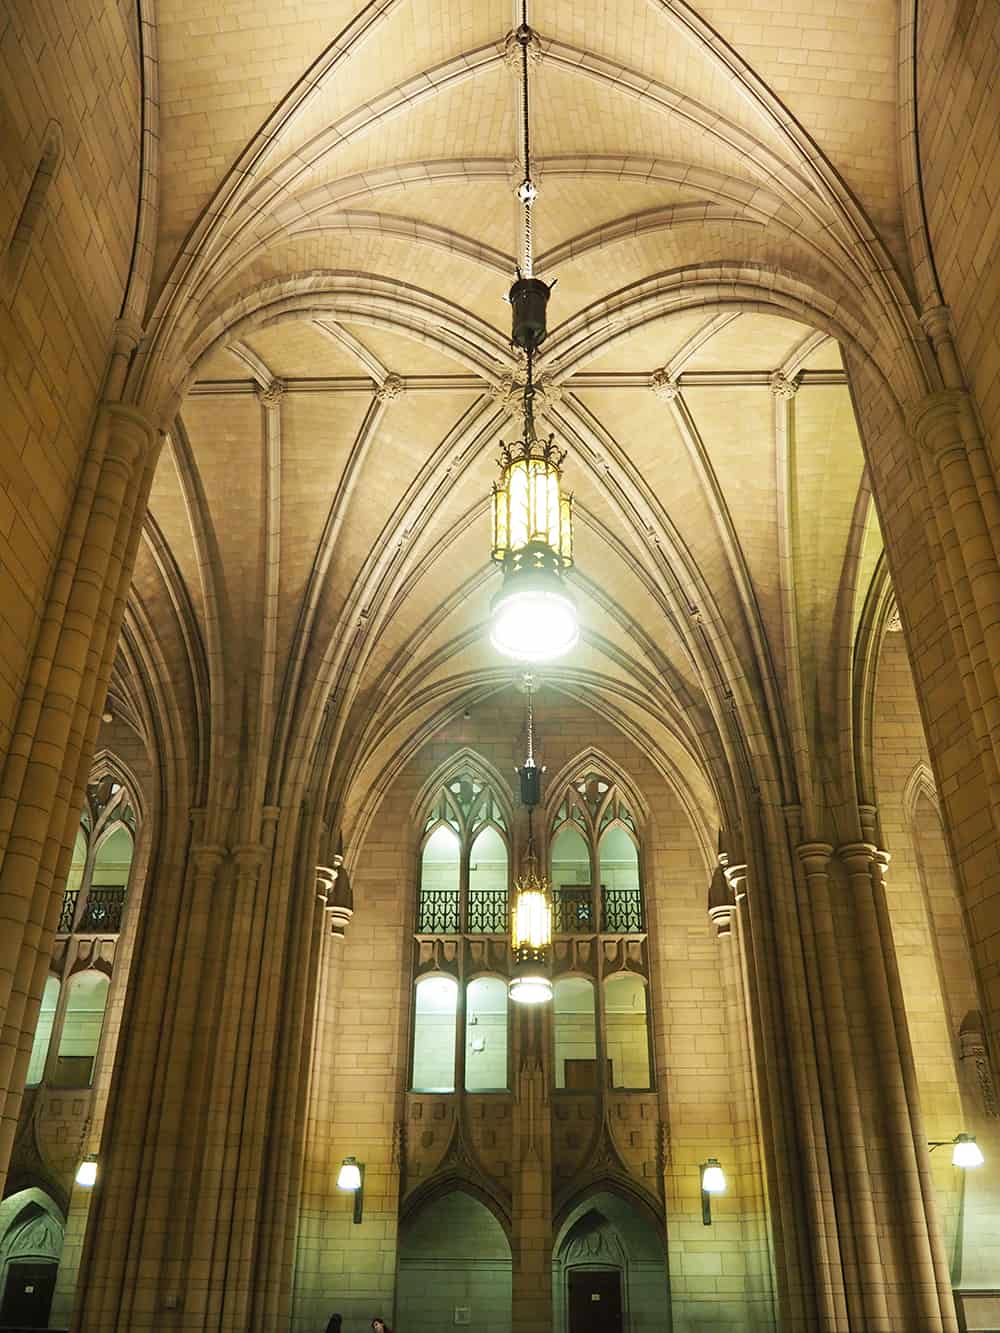 The Cathedral of Learning is the second largest gothic-styled architecture building in the world in Pittsburgh, Pennsylvania. The Cathedral of Learning is on University of Pittsburgh's campus and classes began in the 1930s. The arches in the common rooms are true arches with no steel supports. | affordable family day trip + places to visit in Pittsburgh, Pennsylvania via Autumn All Along